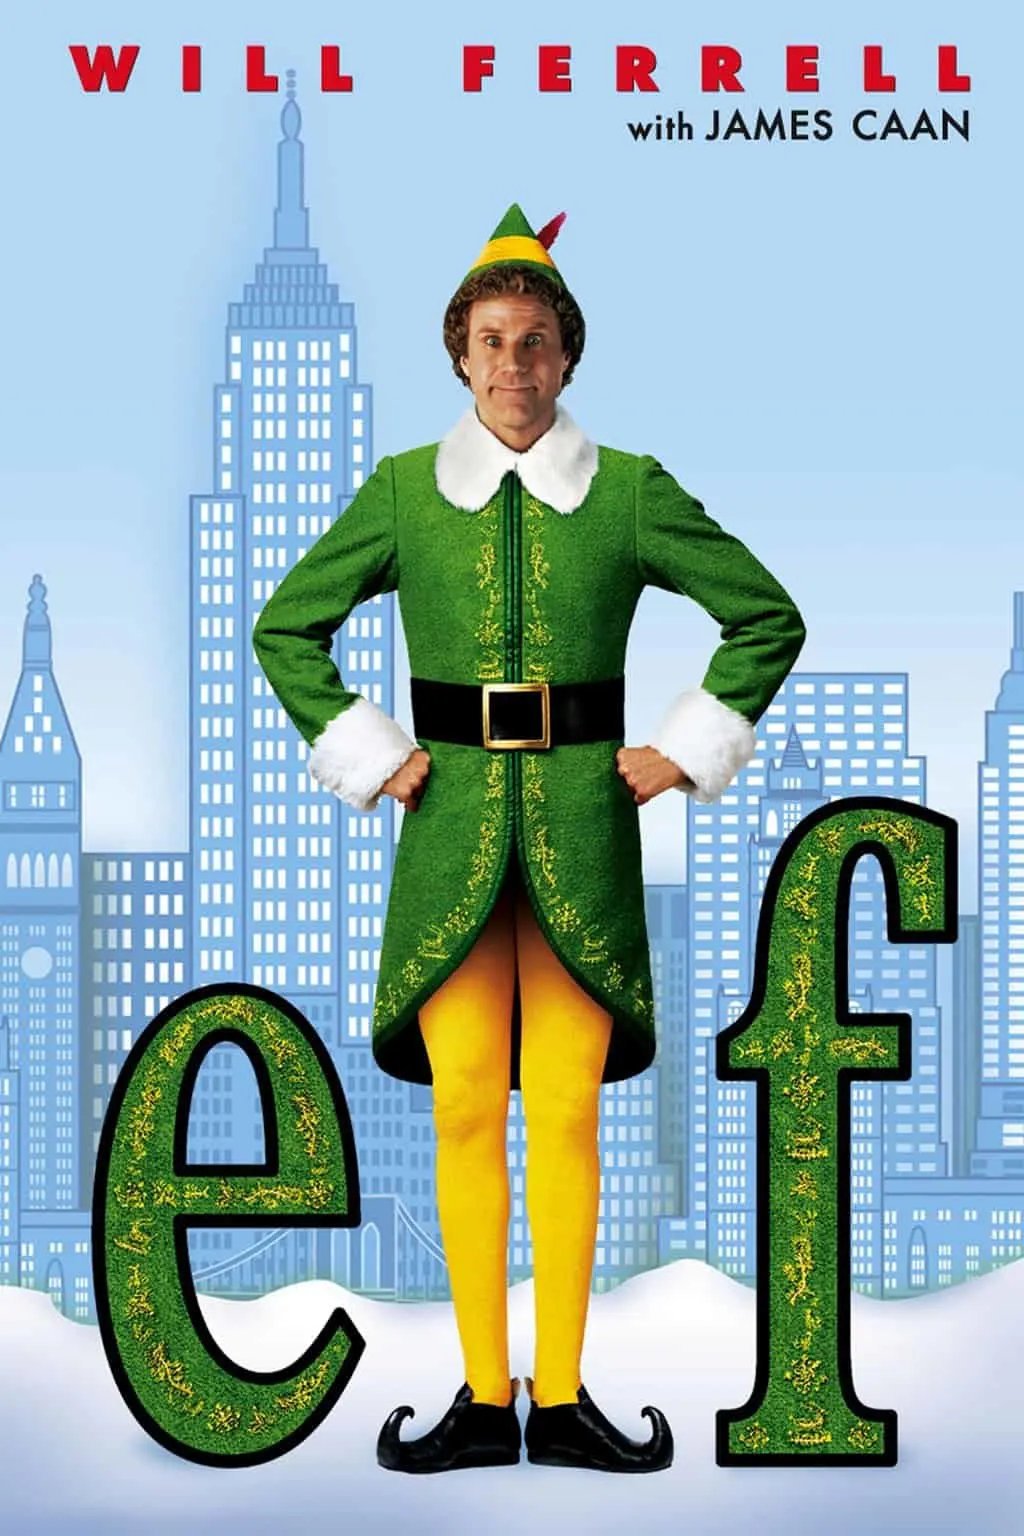 What age is elf kids for?